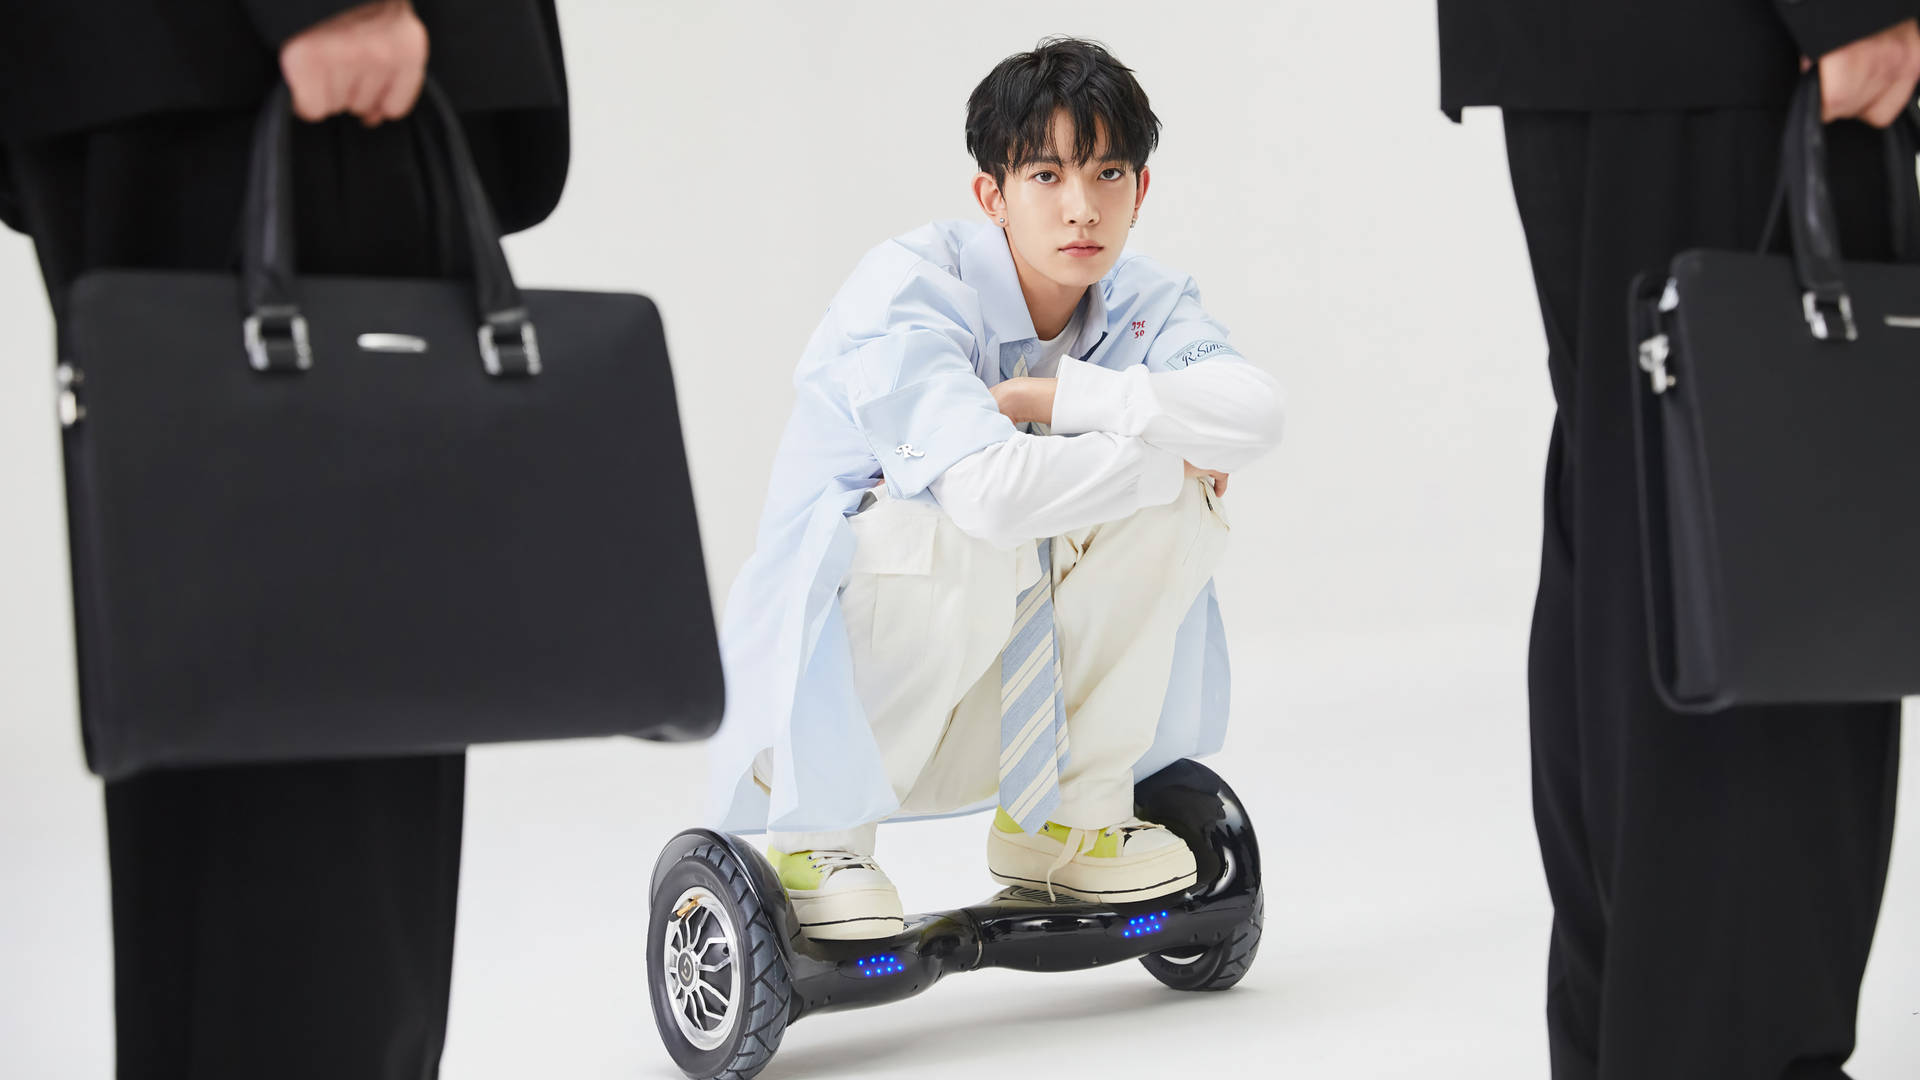 Enhypen Heeseung On A Hoverboard Wallpaper